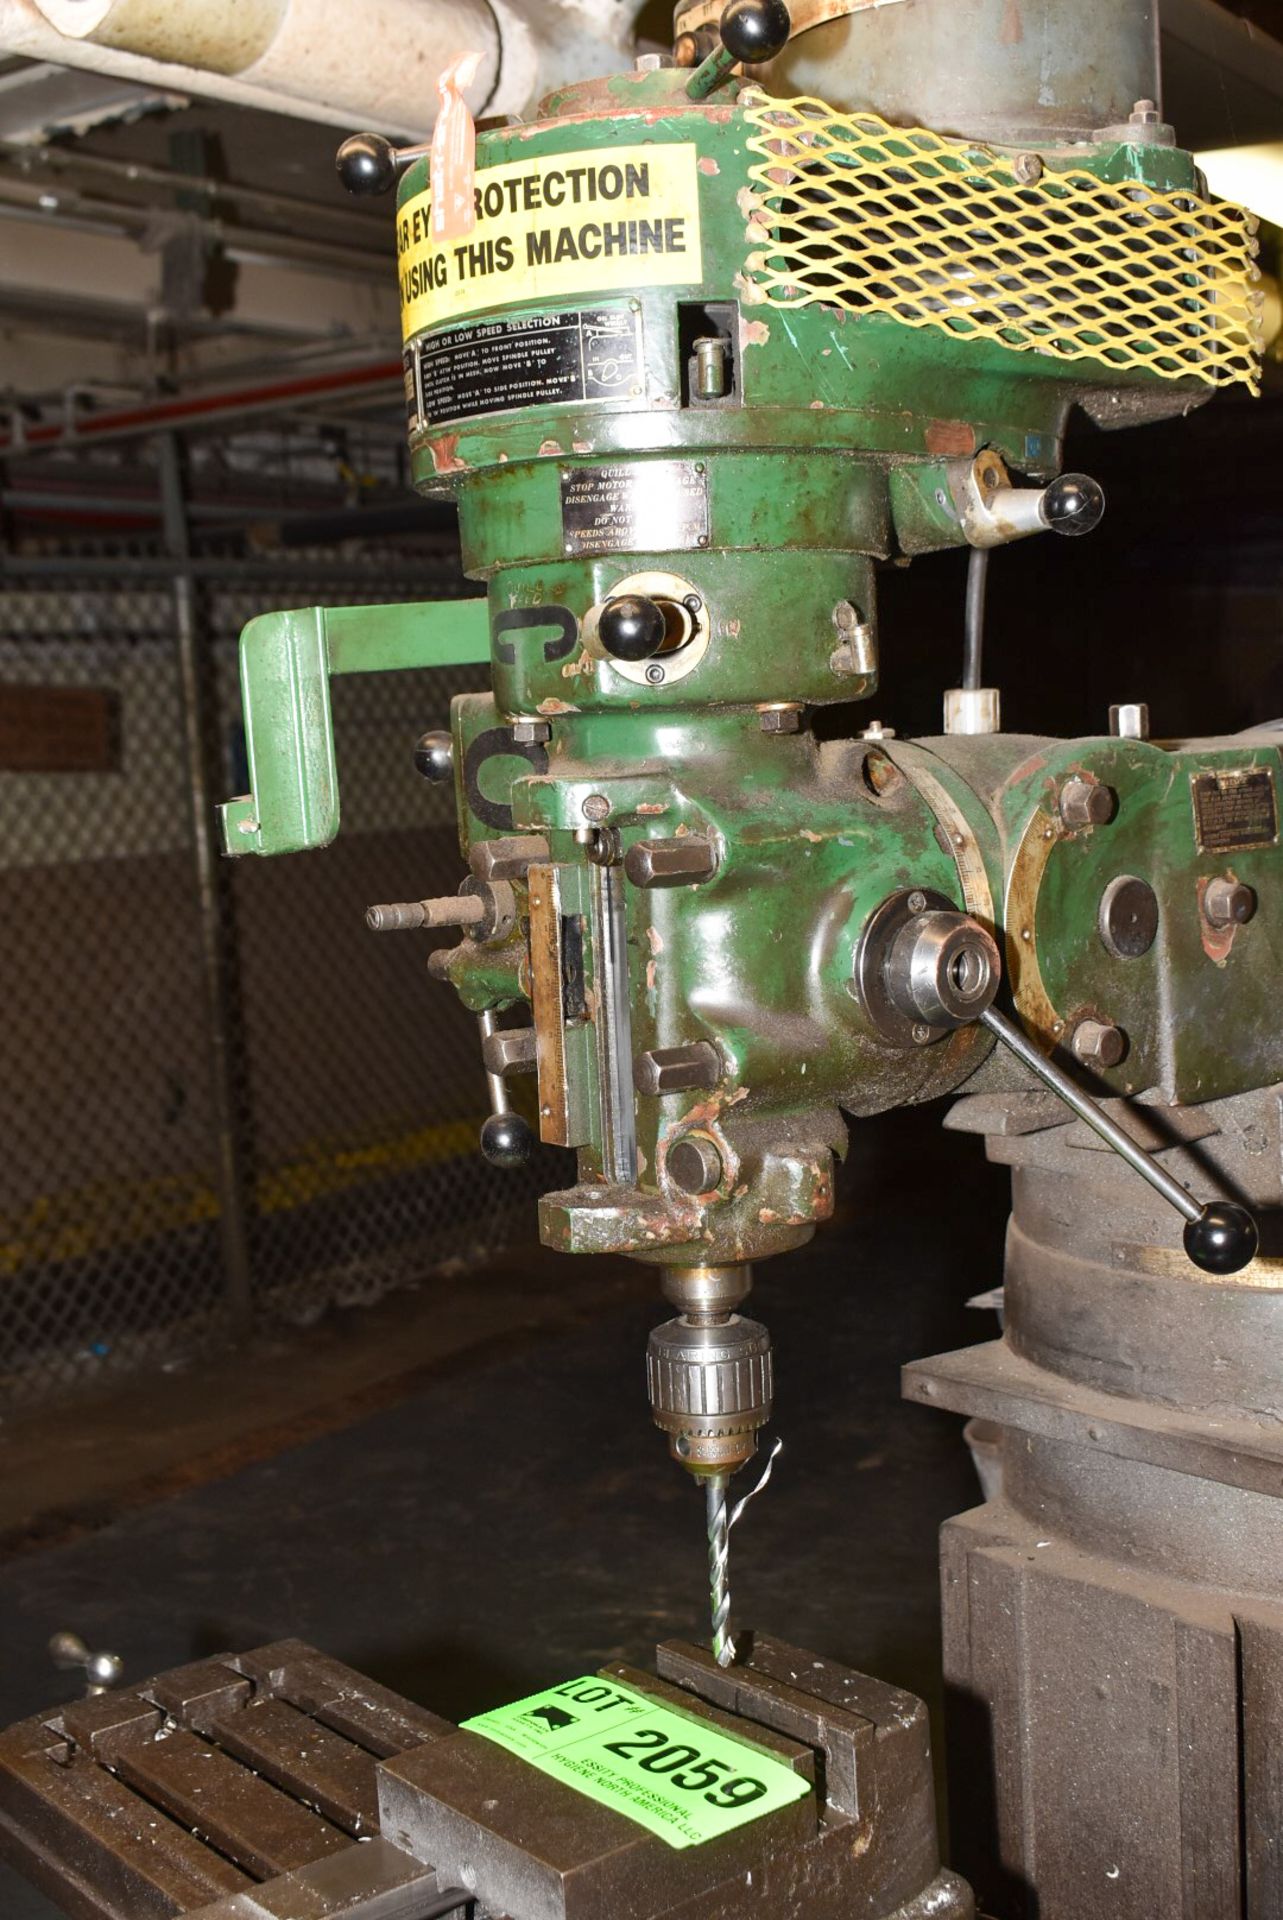 DEKAMILL JS-2V VERTICAL TURRET MILLING MACHINE WITH 9" X 49" TABLE, SPEEDS TO 2720 RPM, R8 SPINDLE - Image 3 of 6